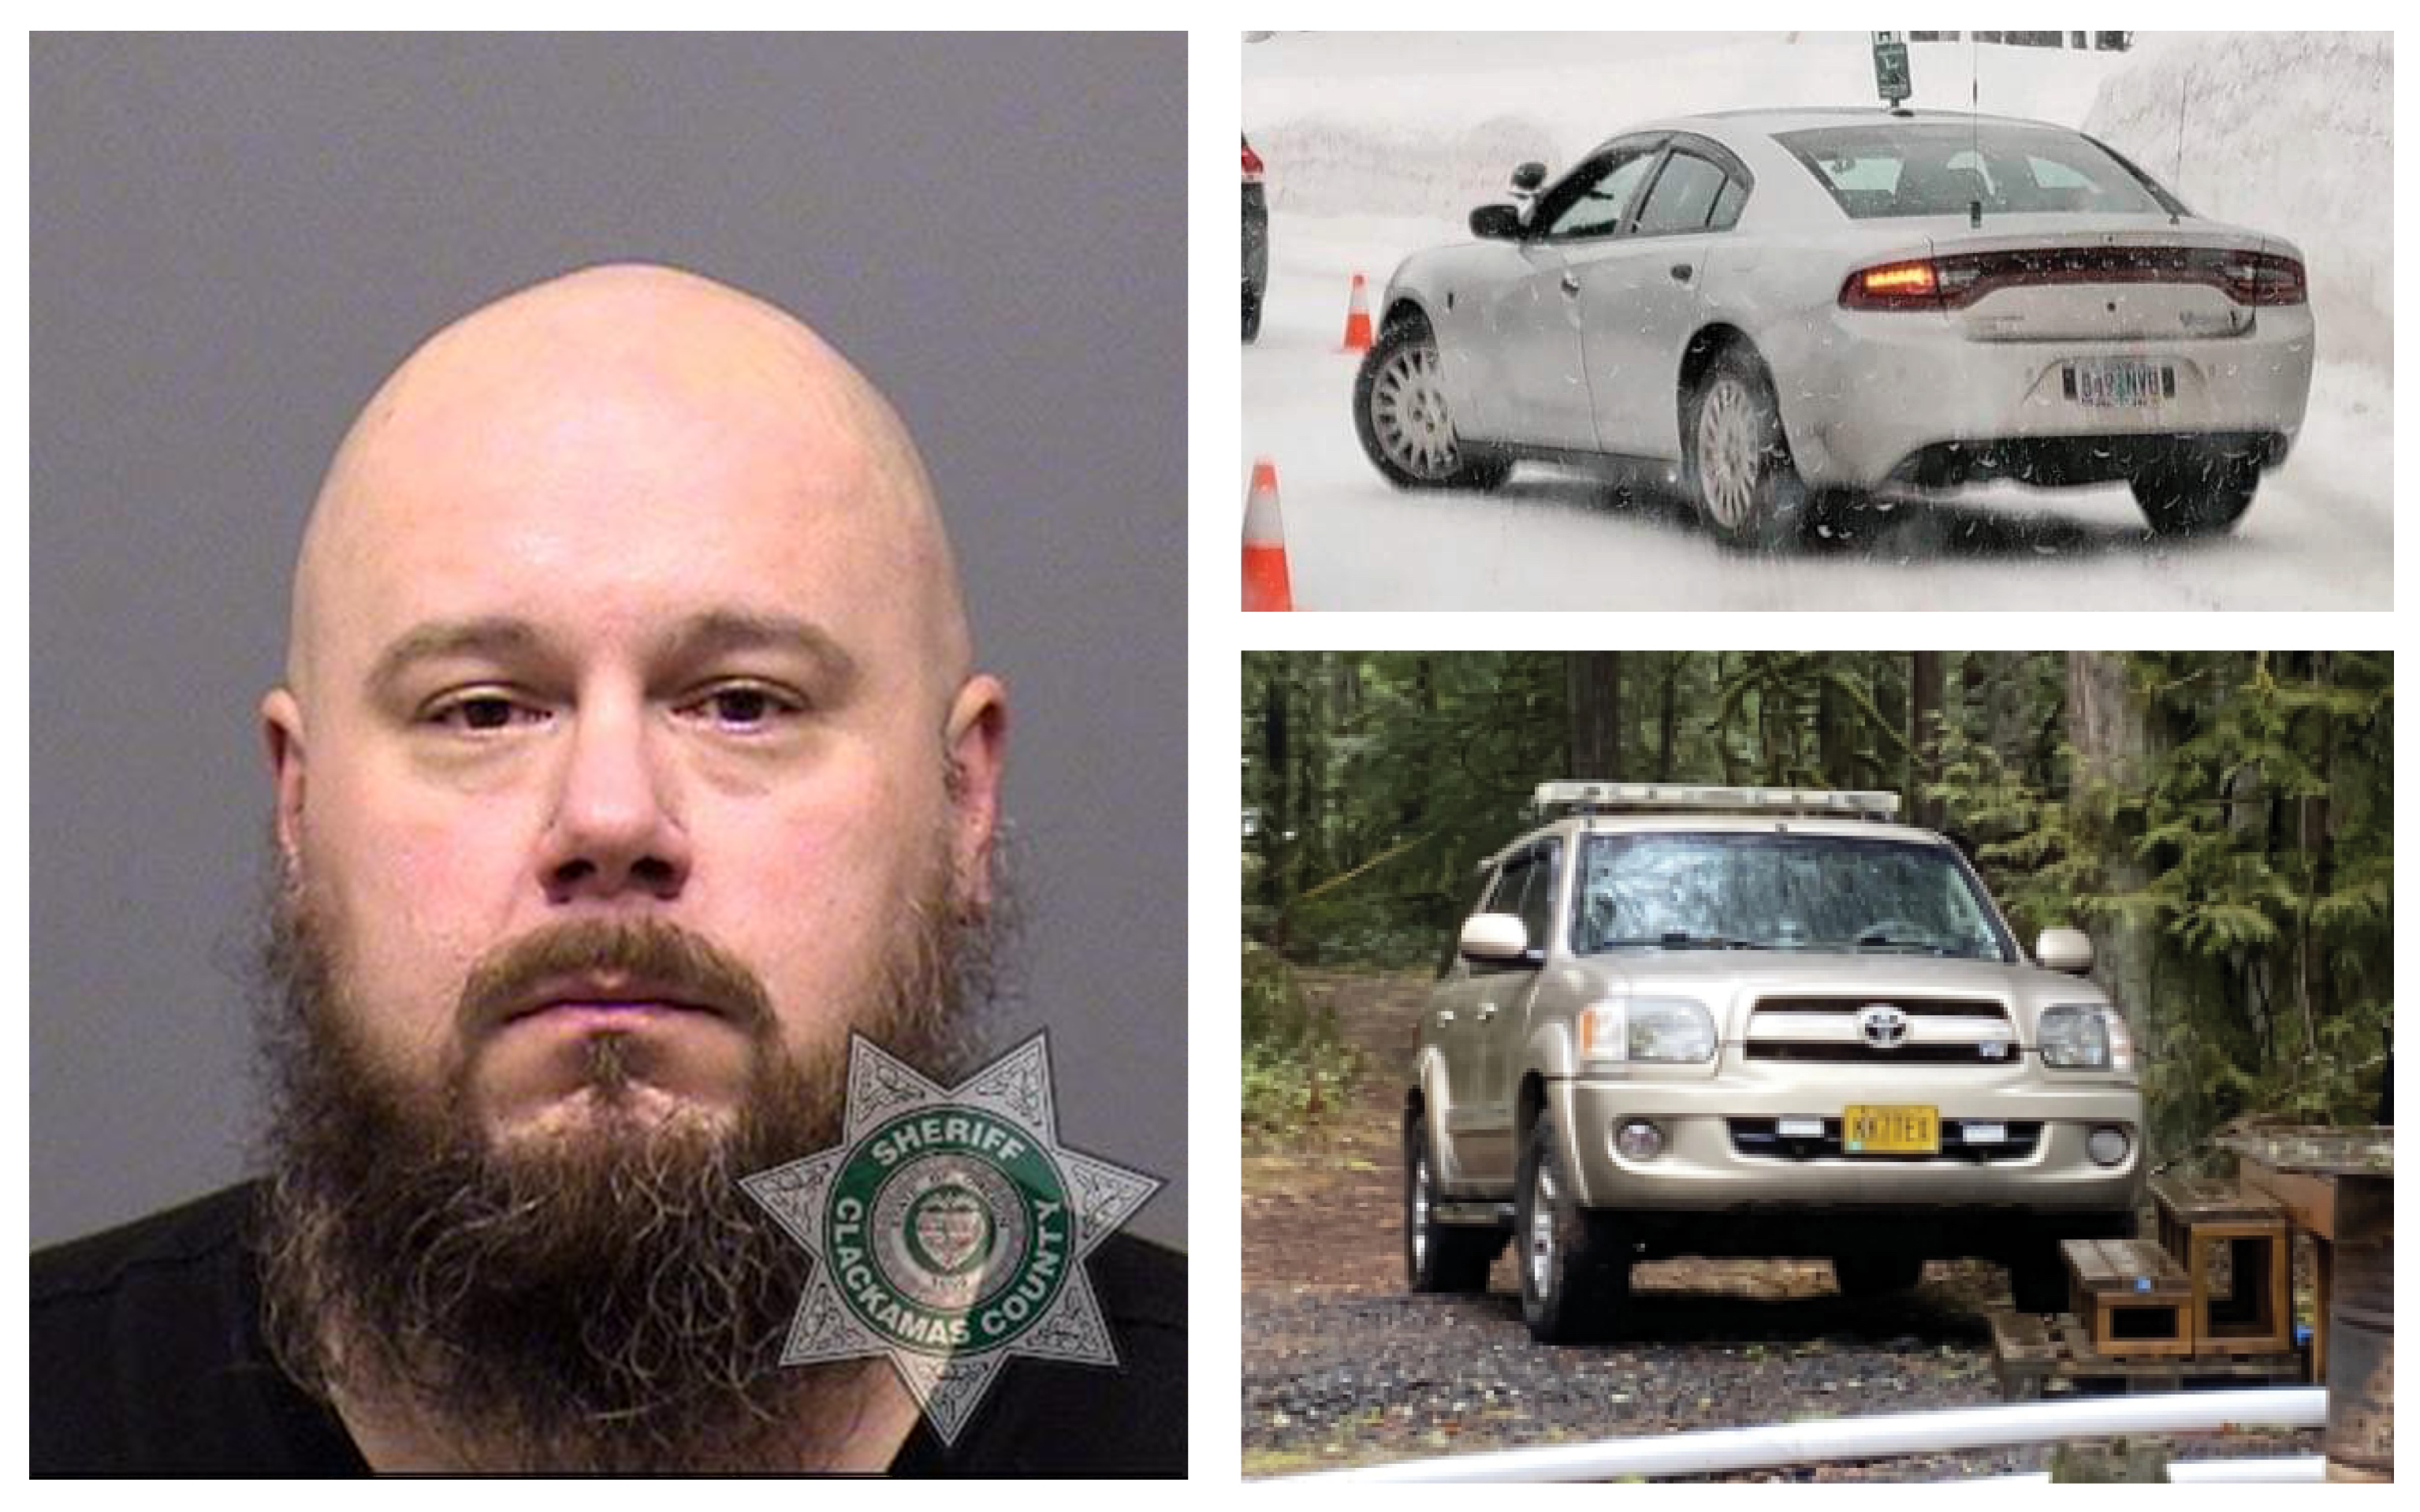 Suspect and suspect vehicle images